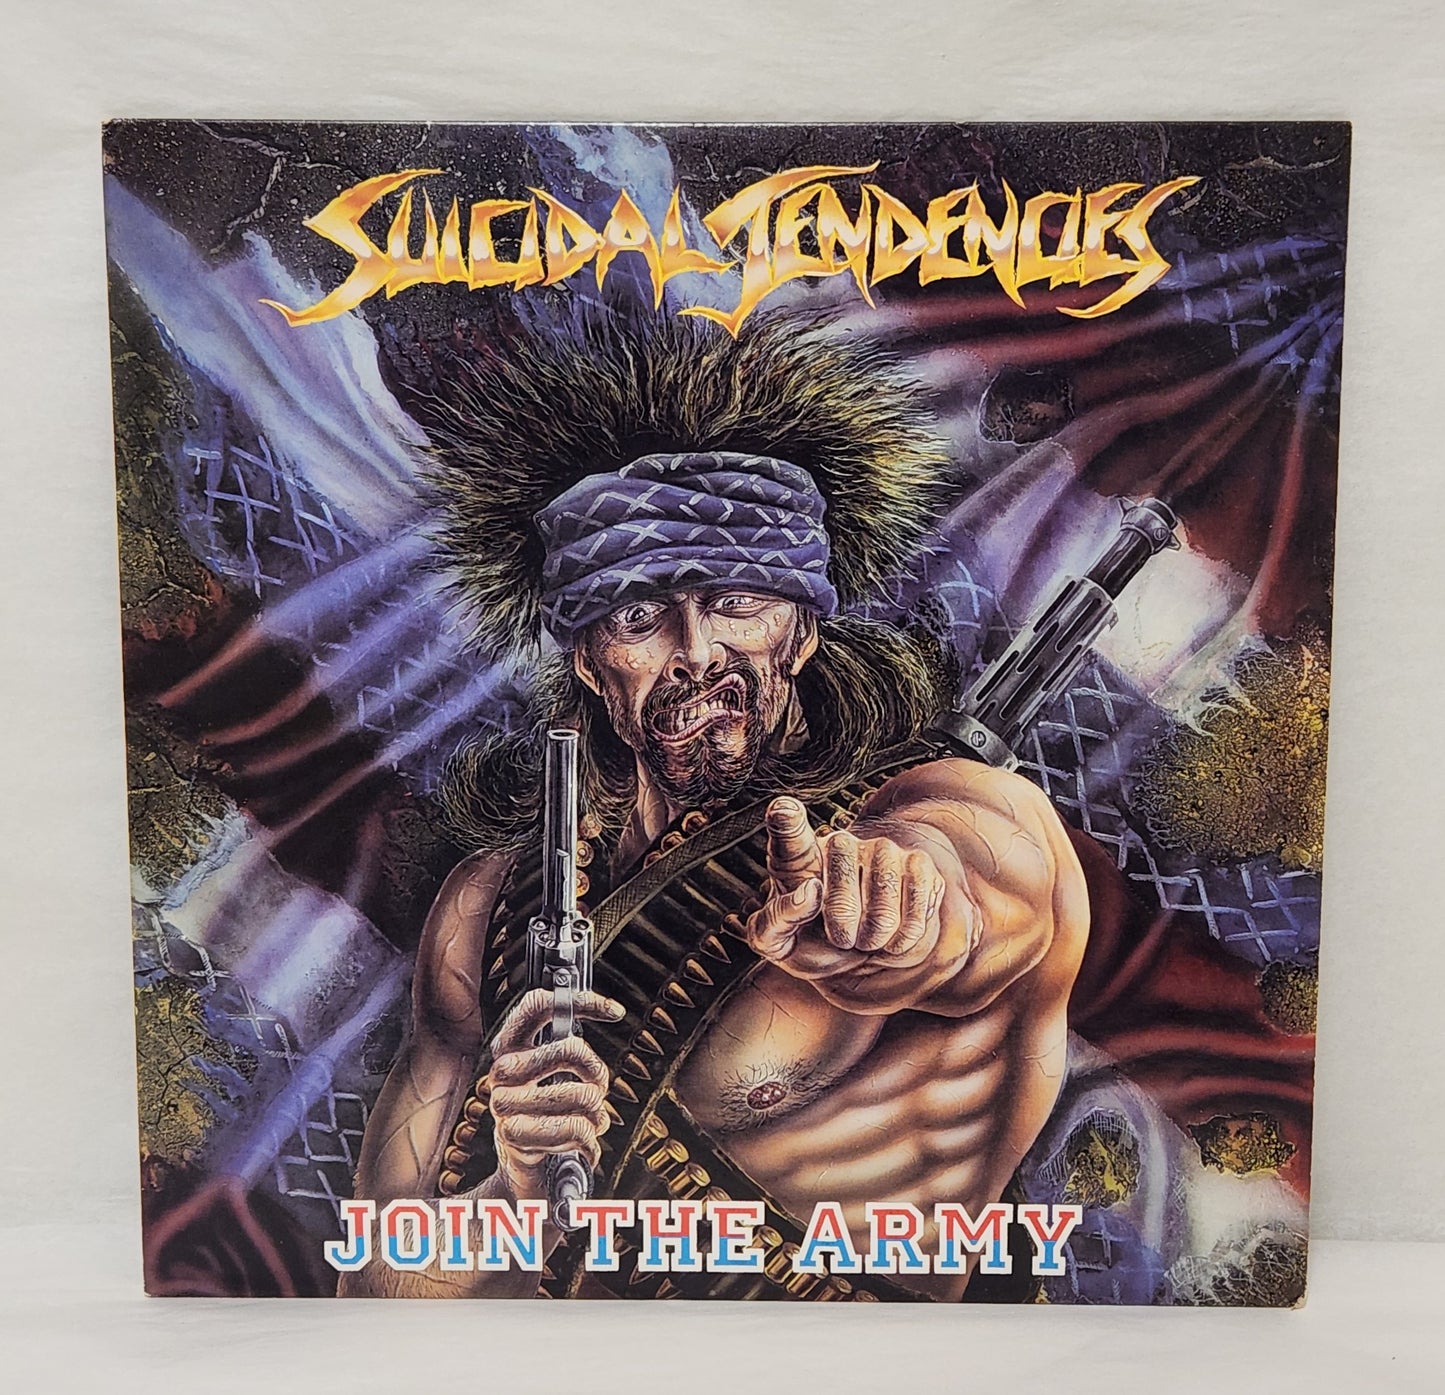 Suicidal Tendencies "Join The Army" 1987 Hardcore Punk Record Album